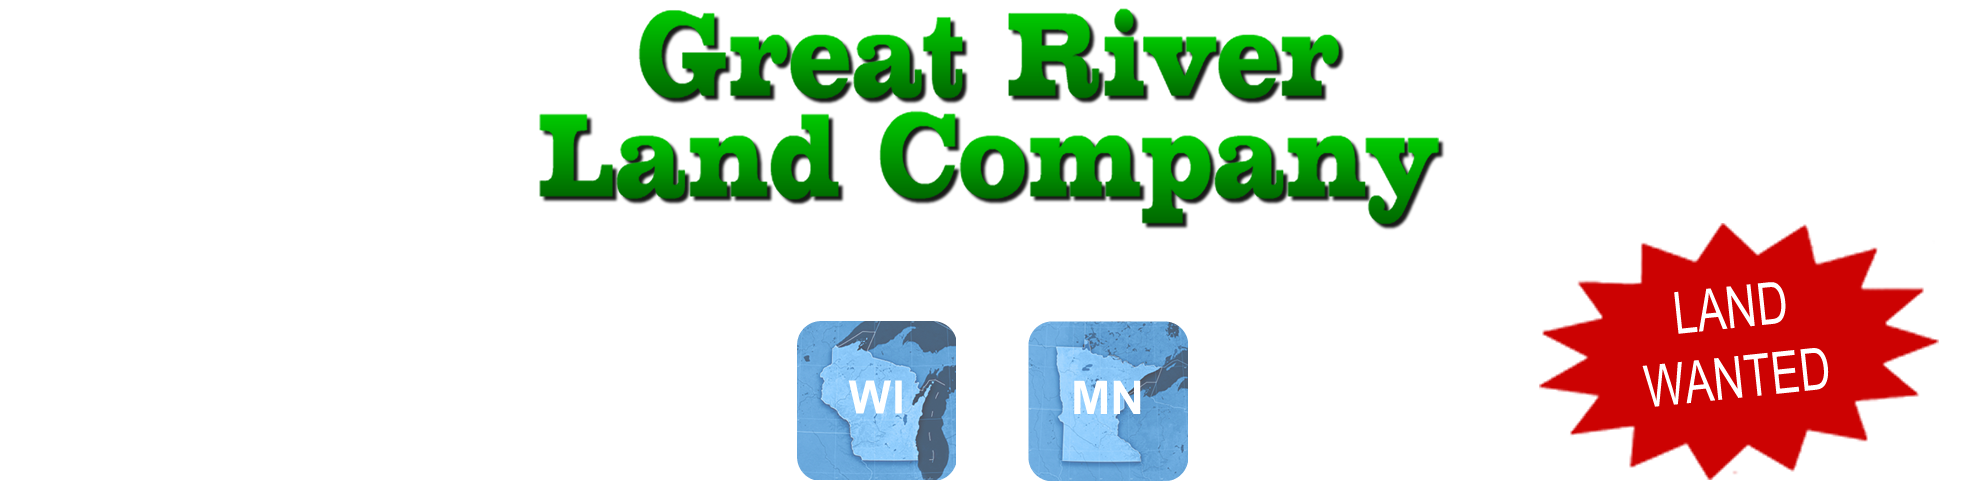 Great River Land Company